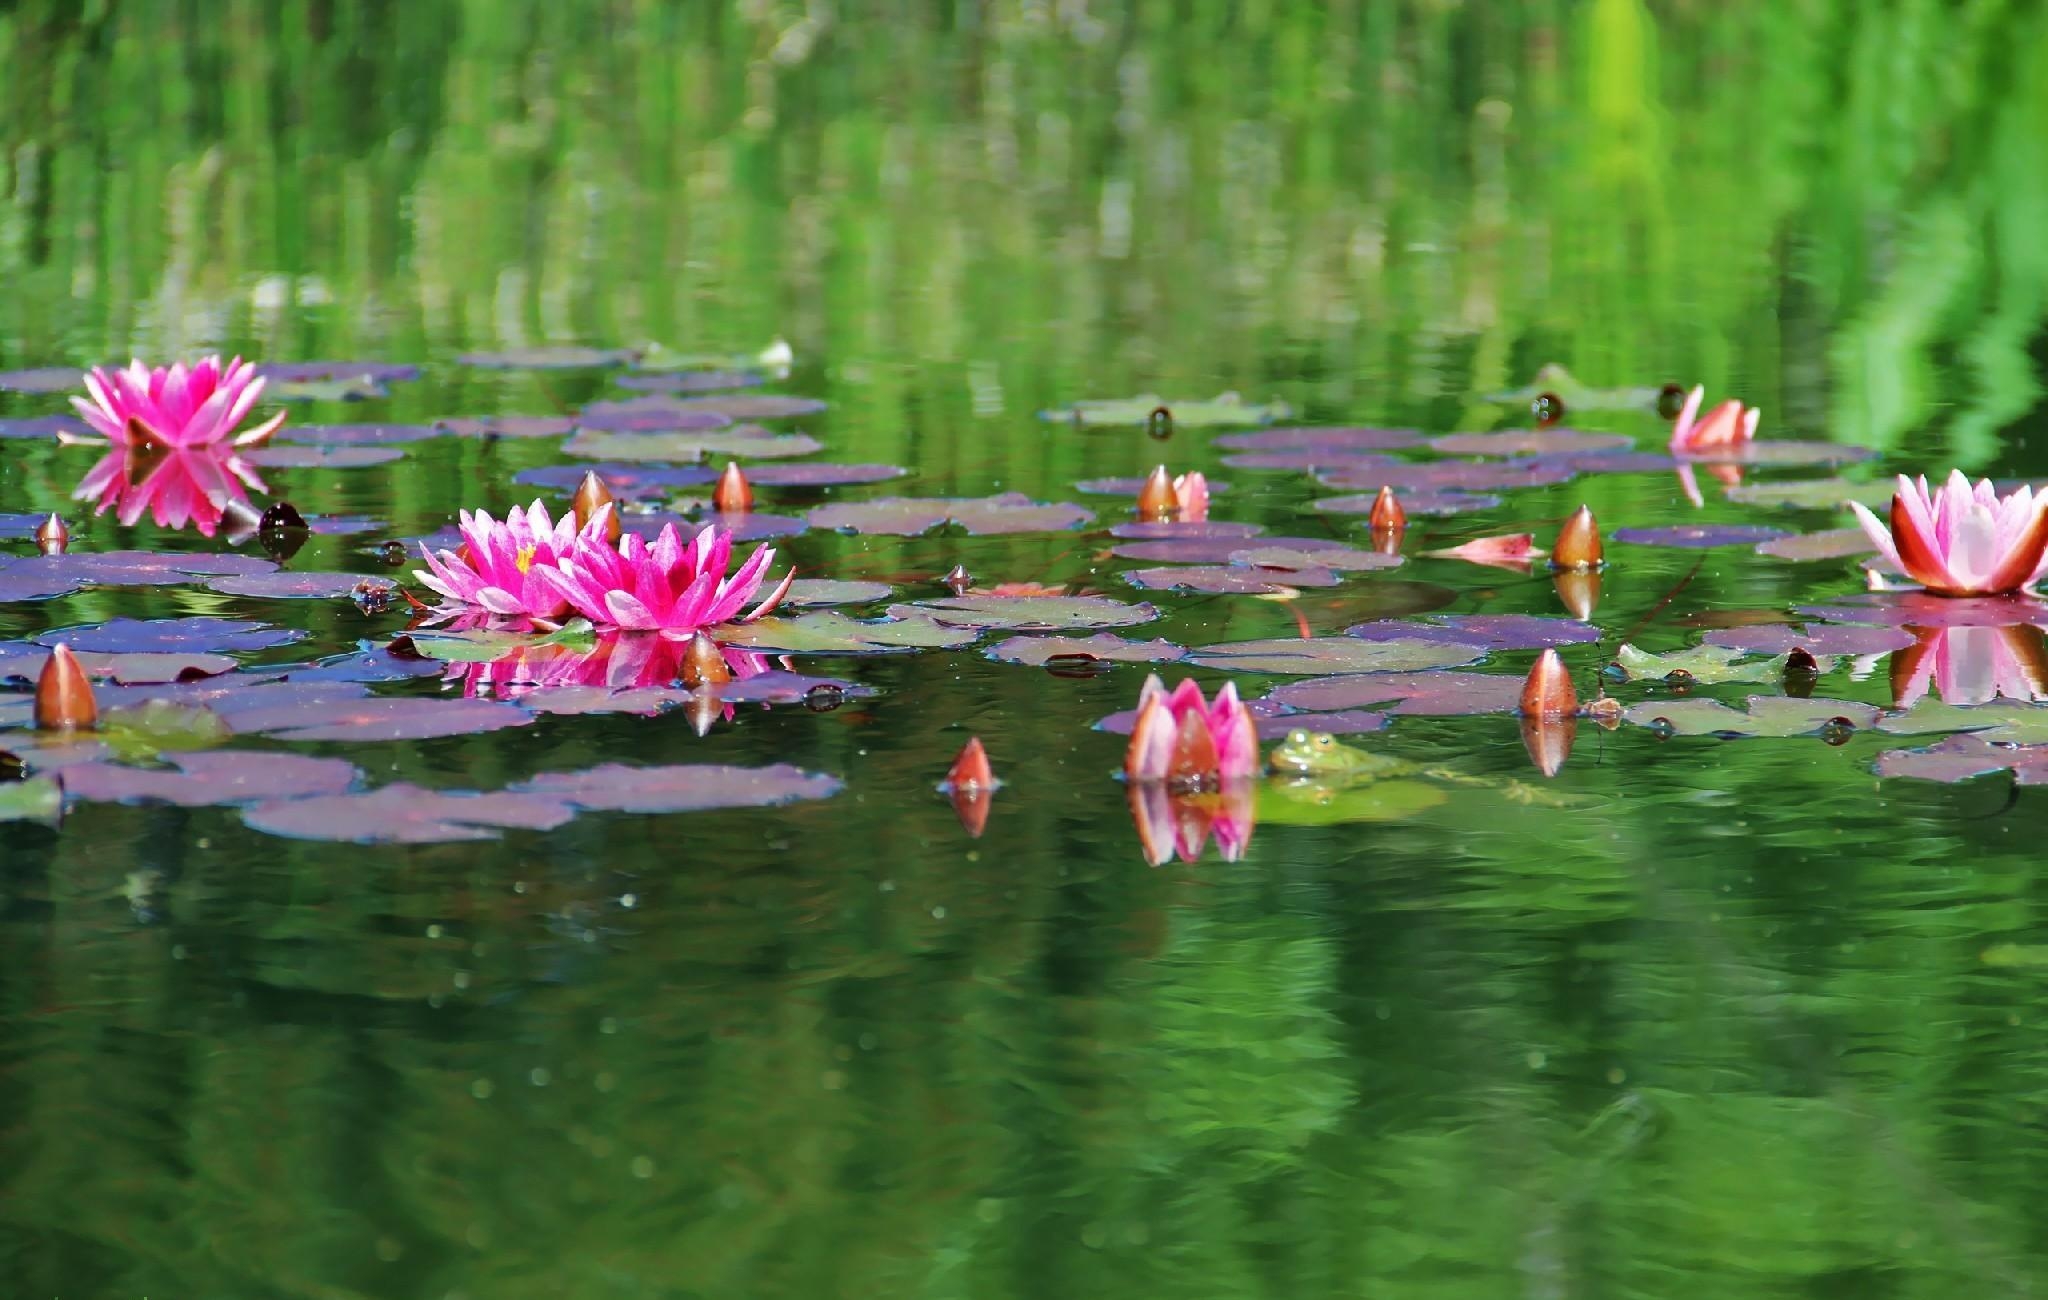 leaves, pond, flowers, water, water lilies, smooth, surface, greens